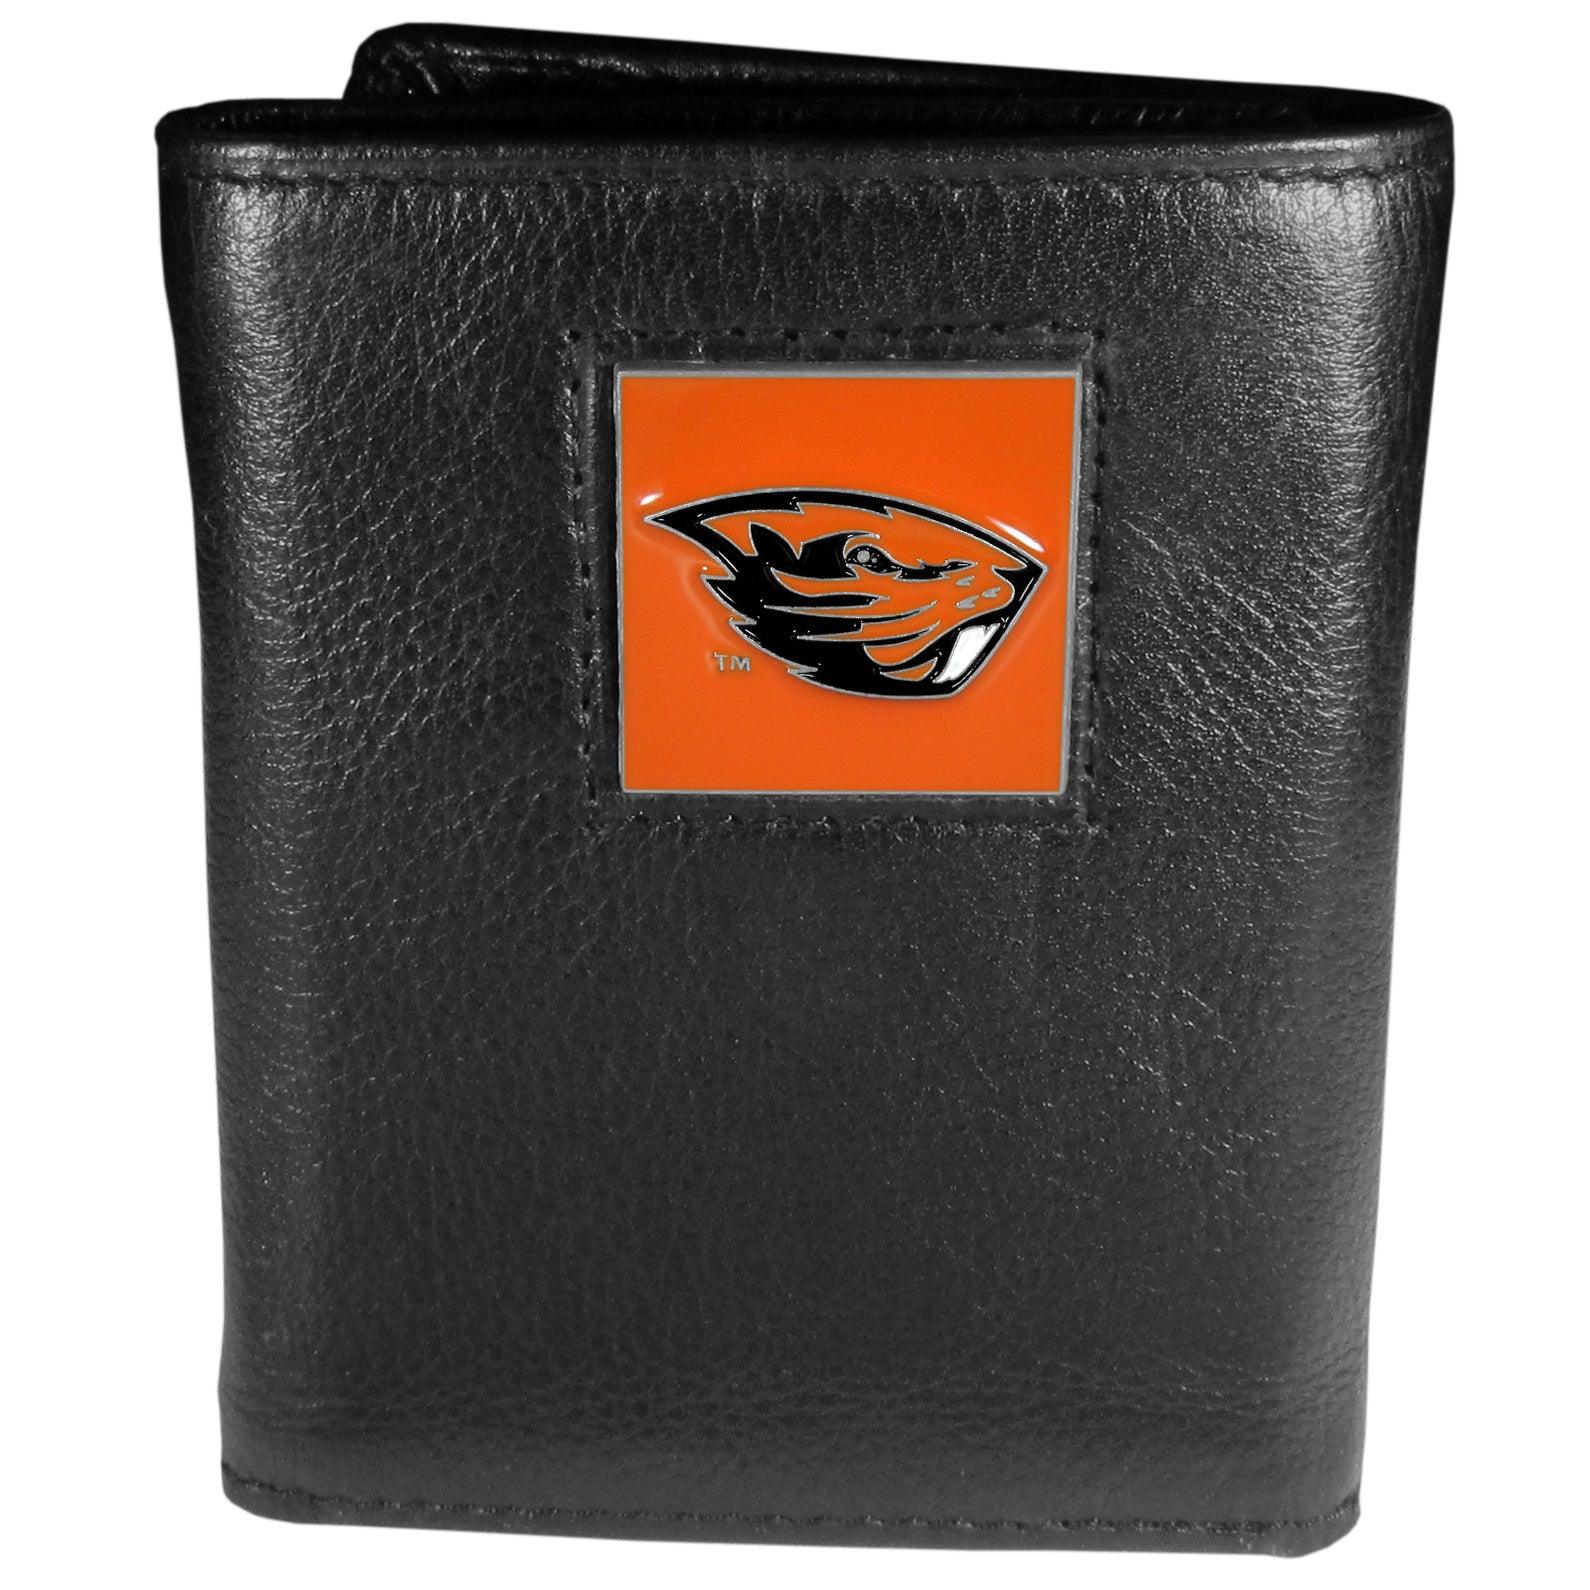 Oregon St. Beavers Deluxe Leather Tri-fold Wallet Packaged in Gift Box - Flyclothing LLC